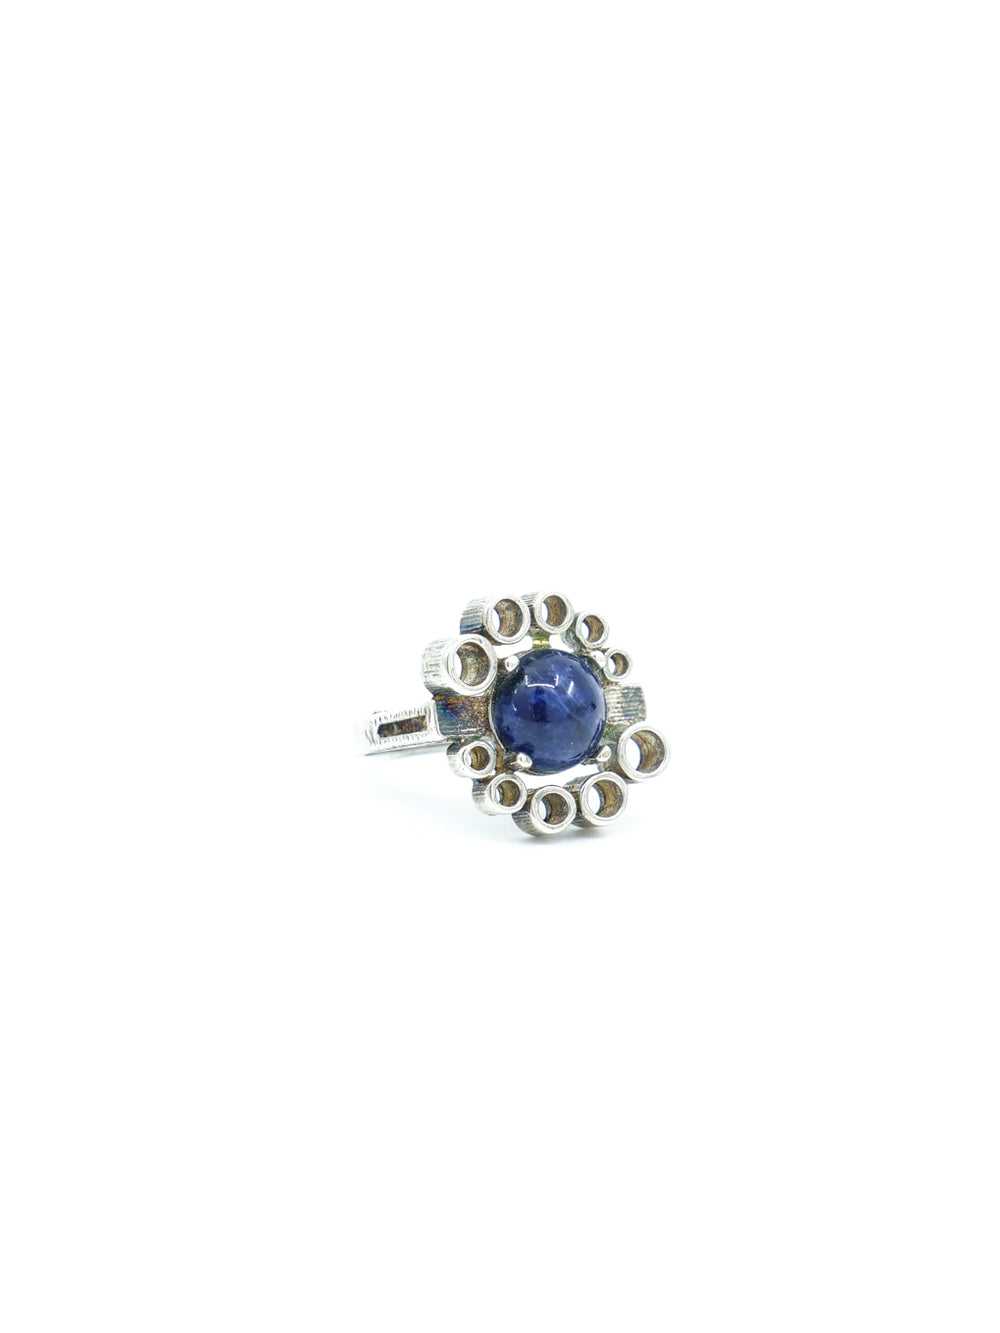 Sterling Silver Lapis Stone Ring - image 2